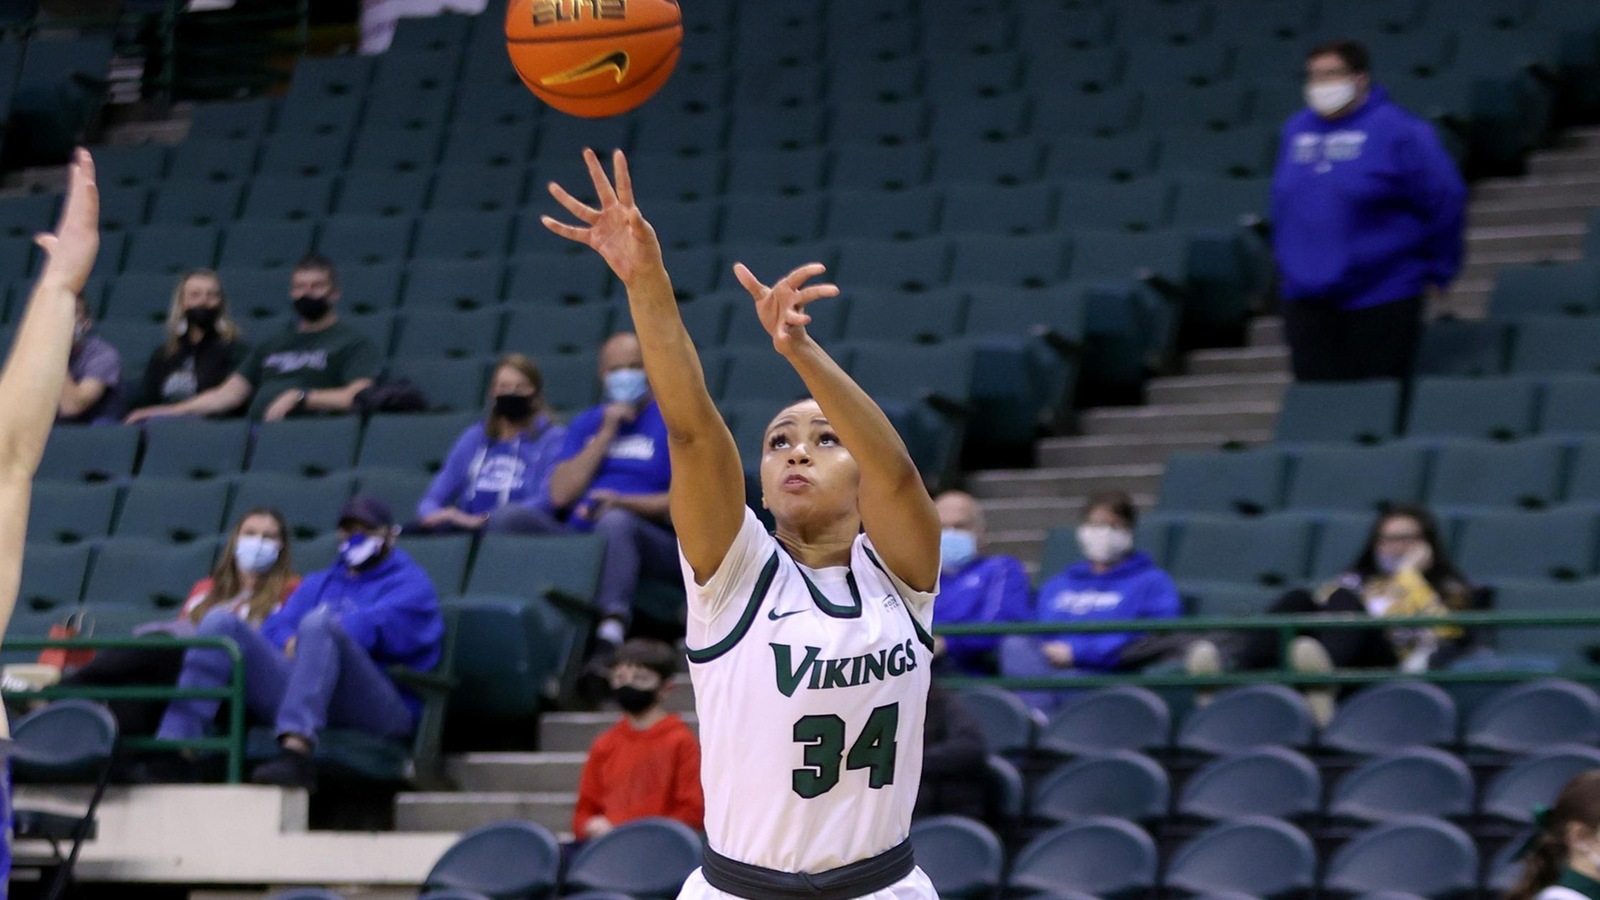 Cleveland State Women’s Basketball Earns 104-51 Victory Over Ohio Christian